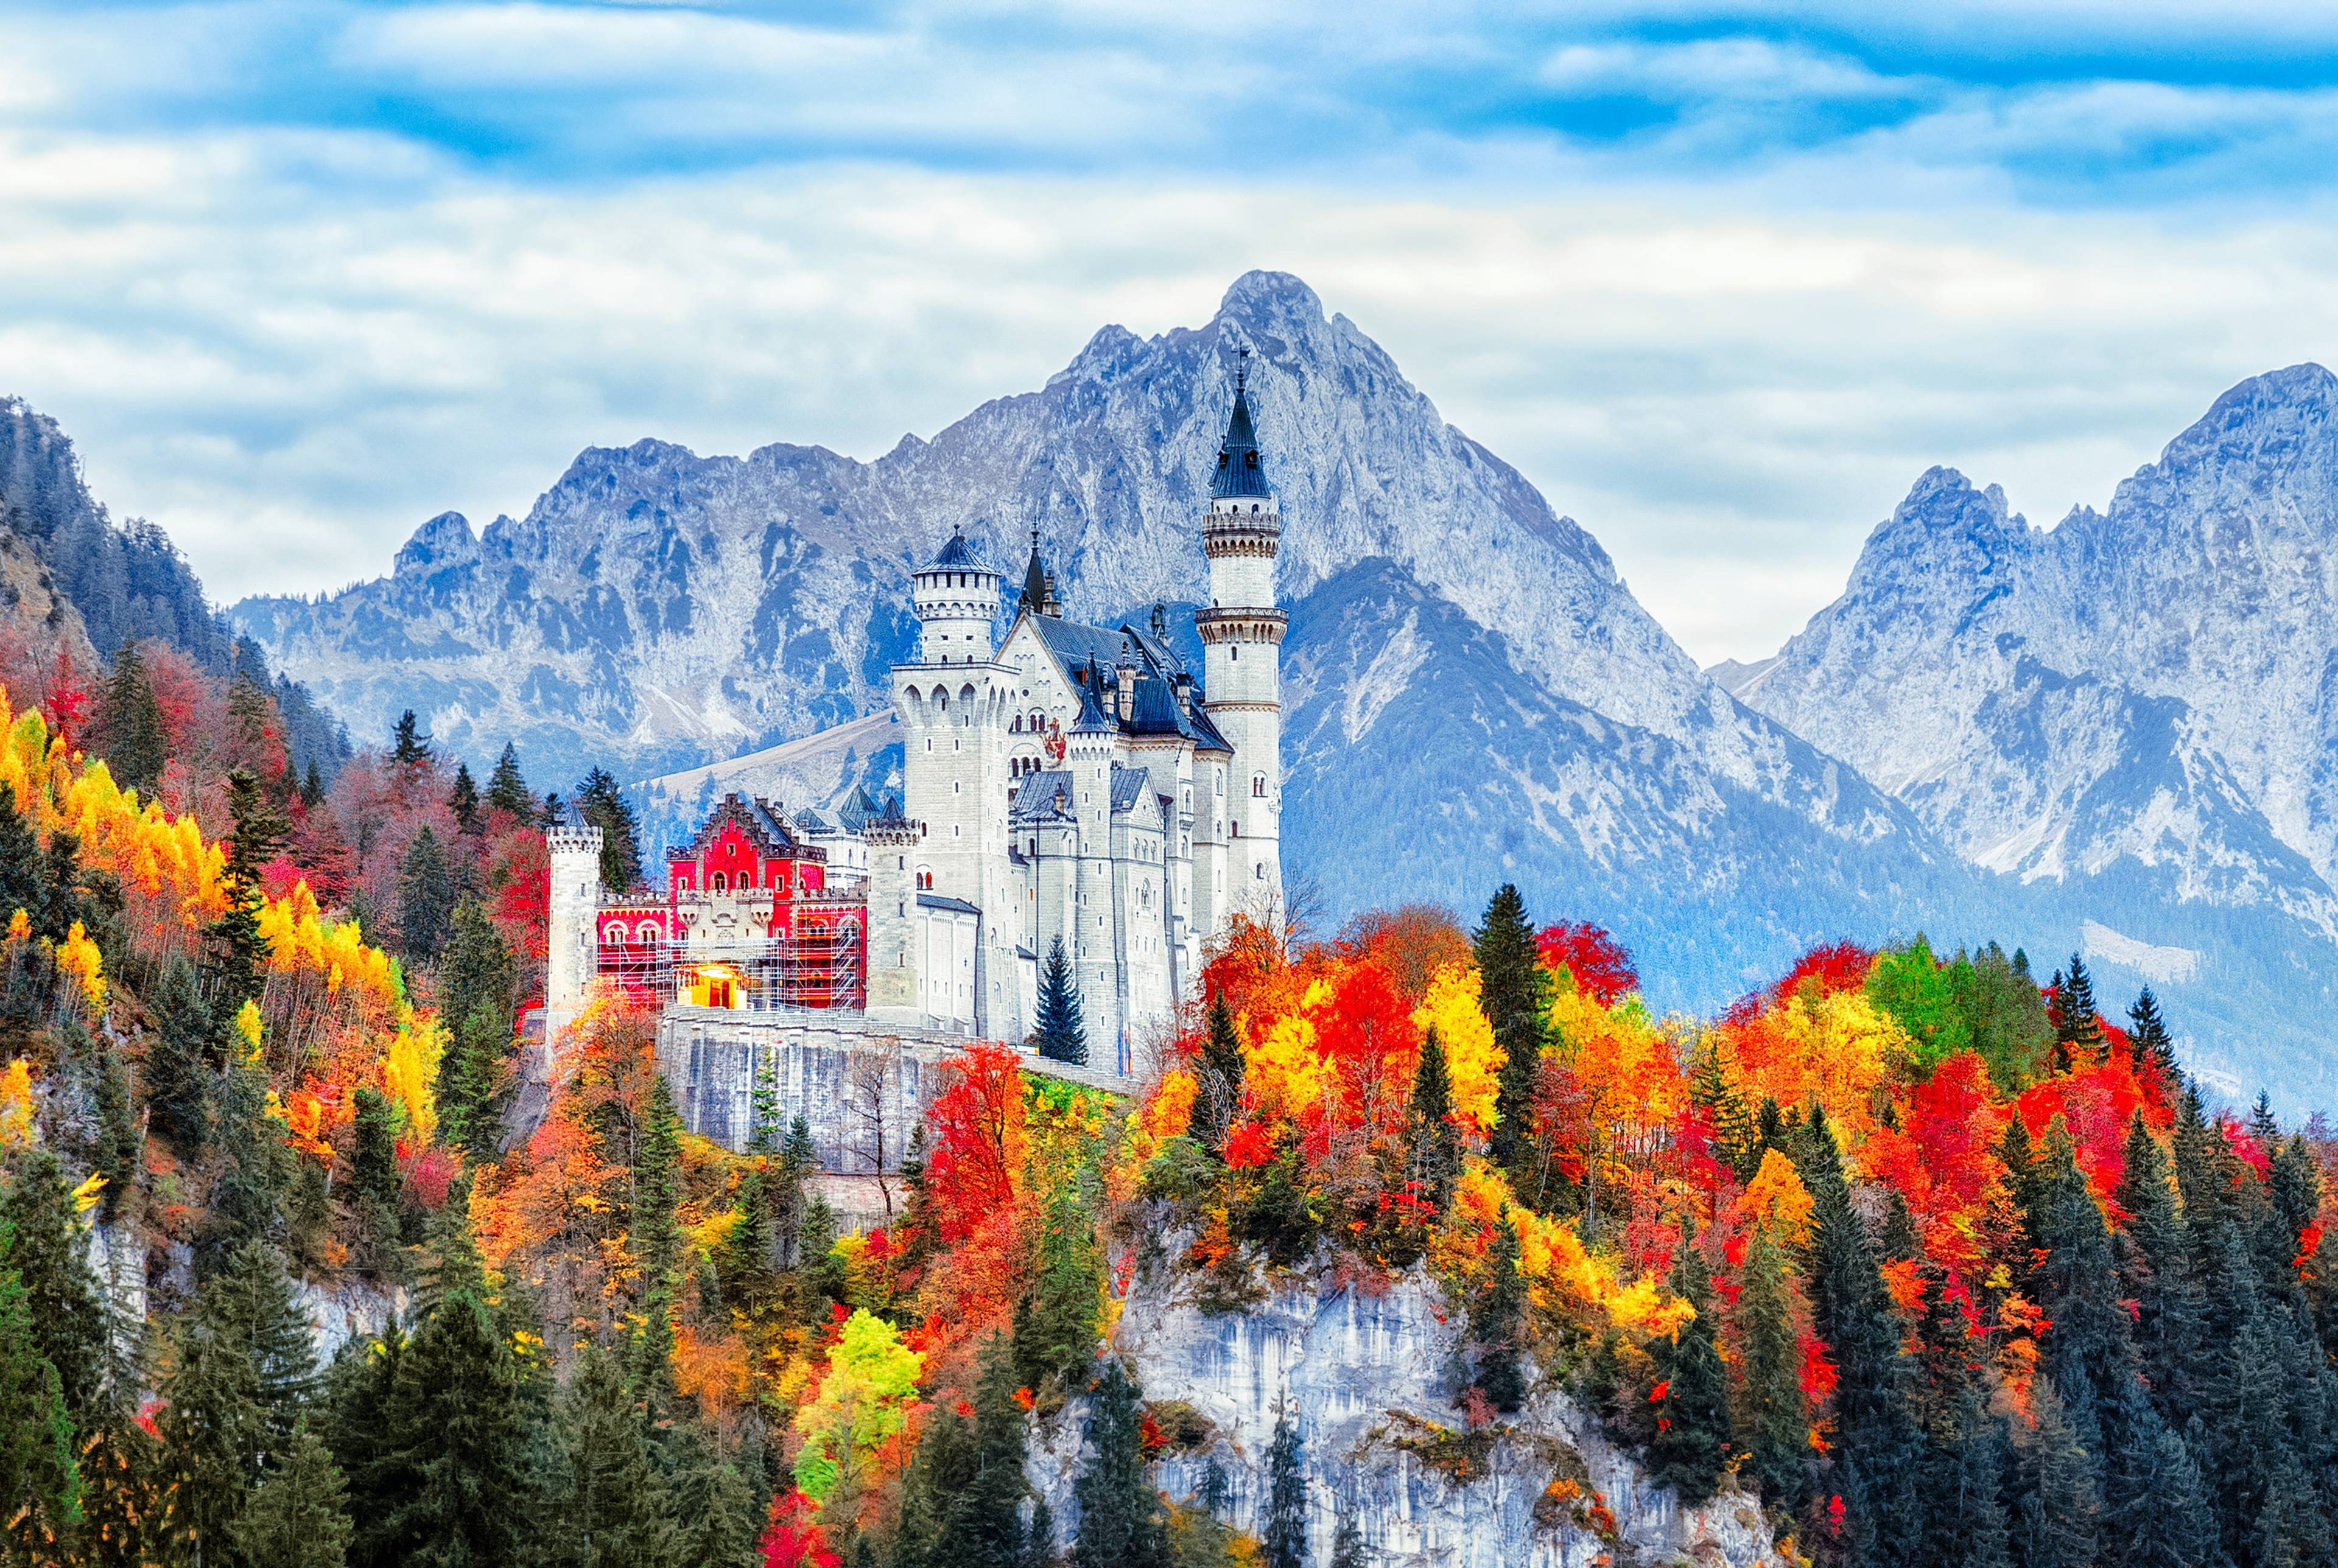 ⚡ Romantic Route Through Southern Bavaria: A Fairy Tale Journey